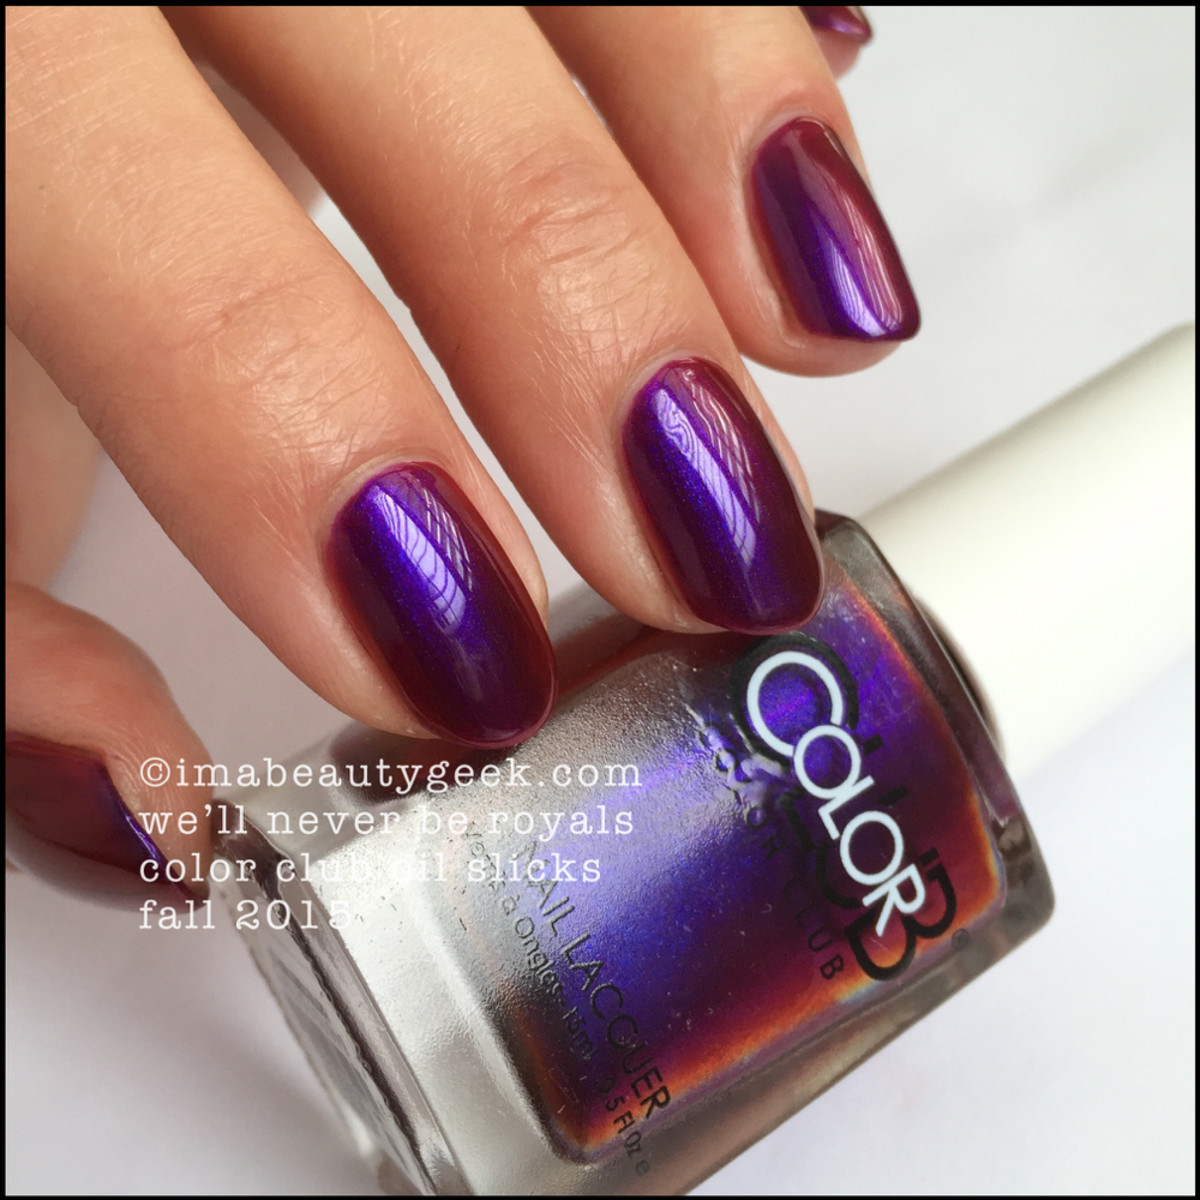 Color Club Oil Slicks_Color Club Well Never Be Royals_4